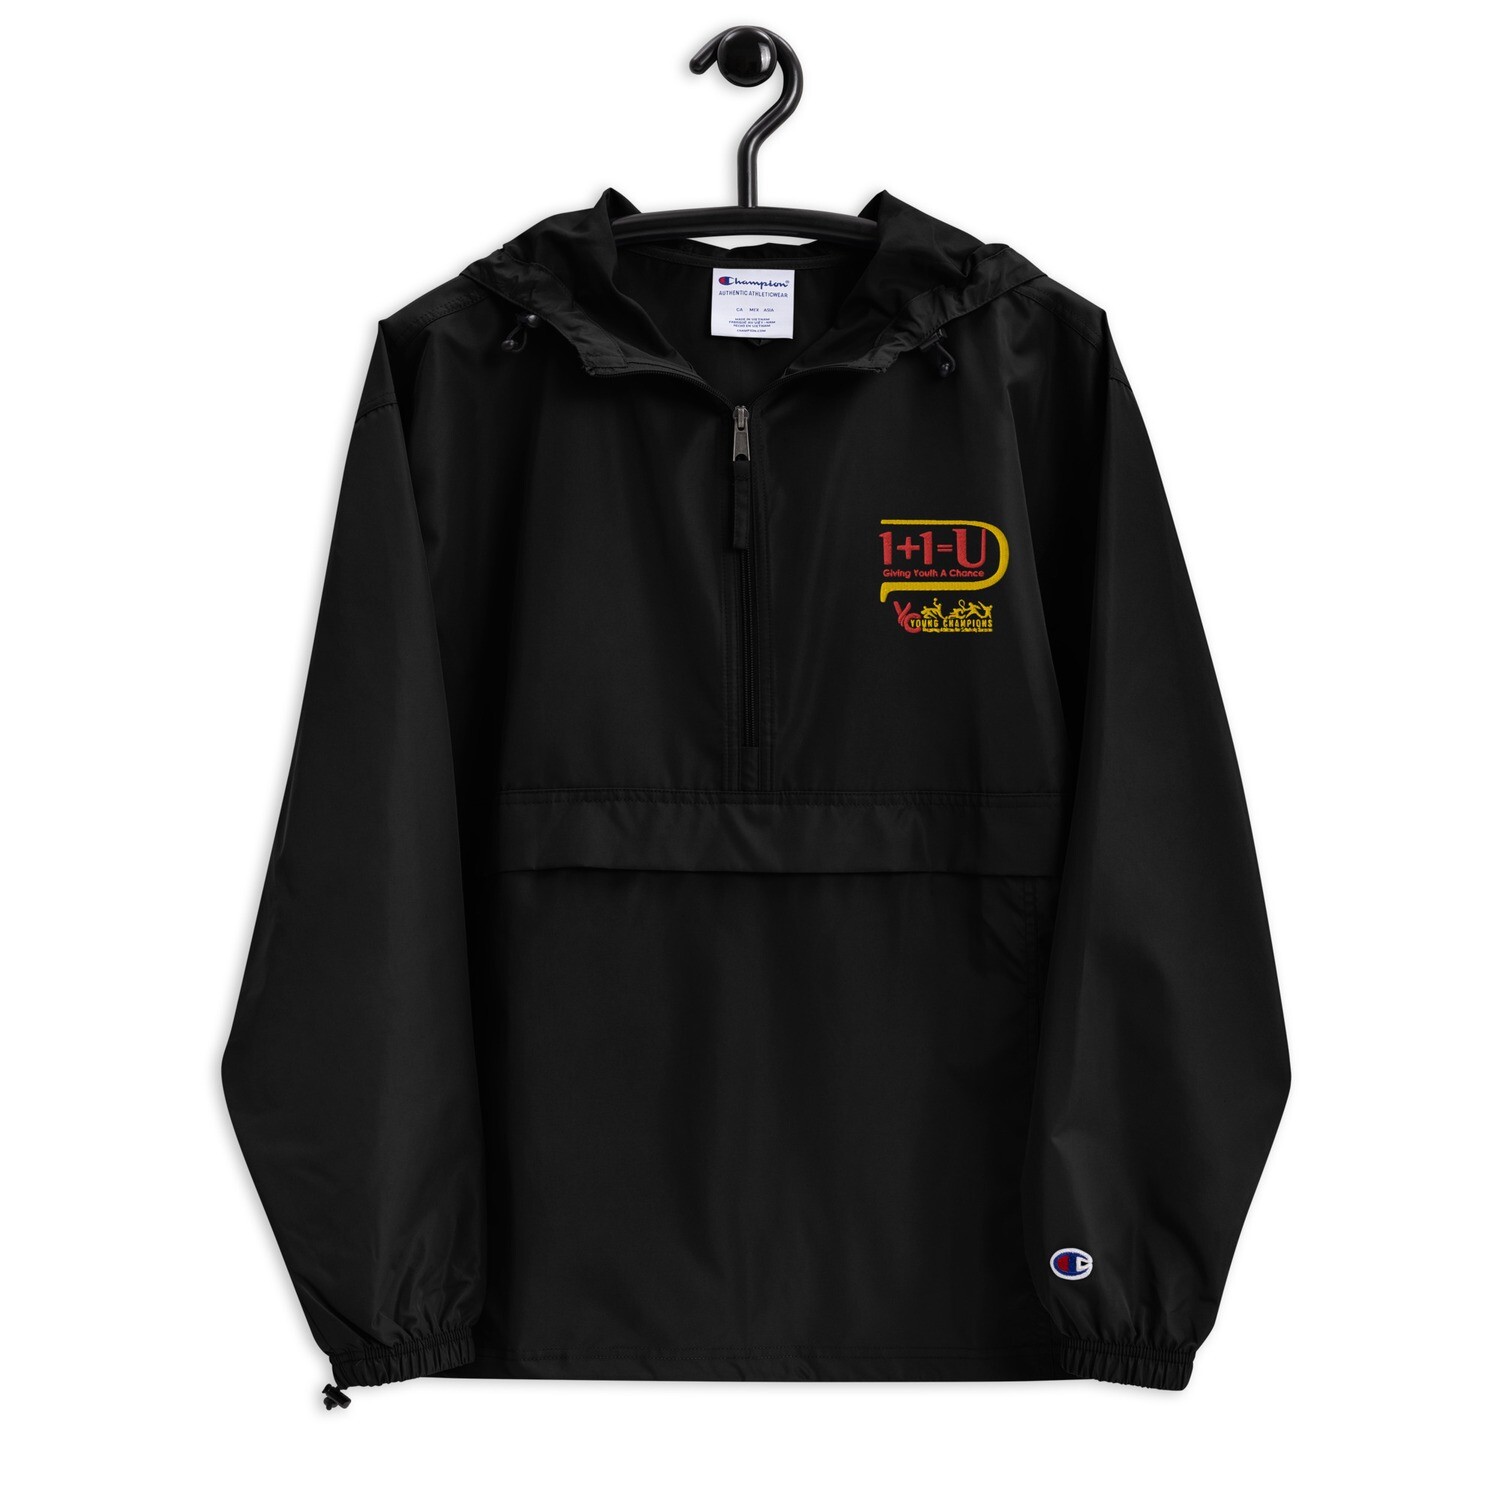 1+1=U Embroidered Champion Packable Jacket